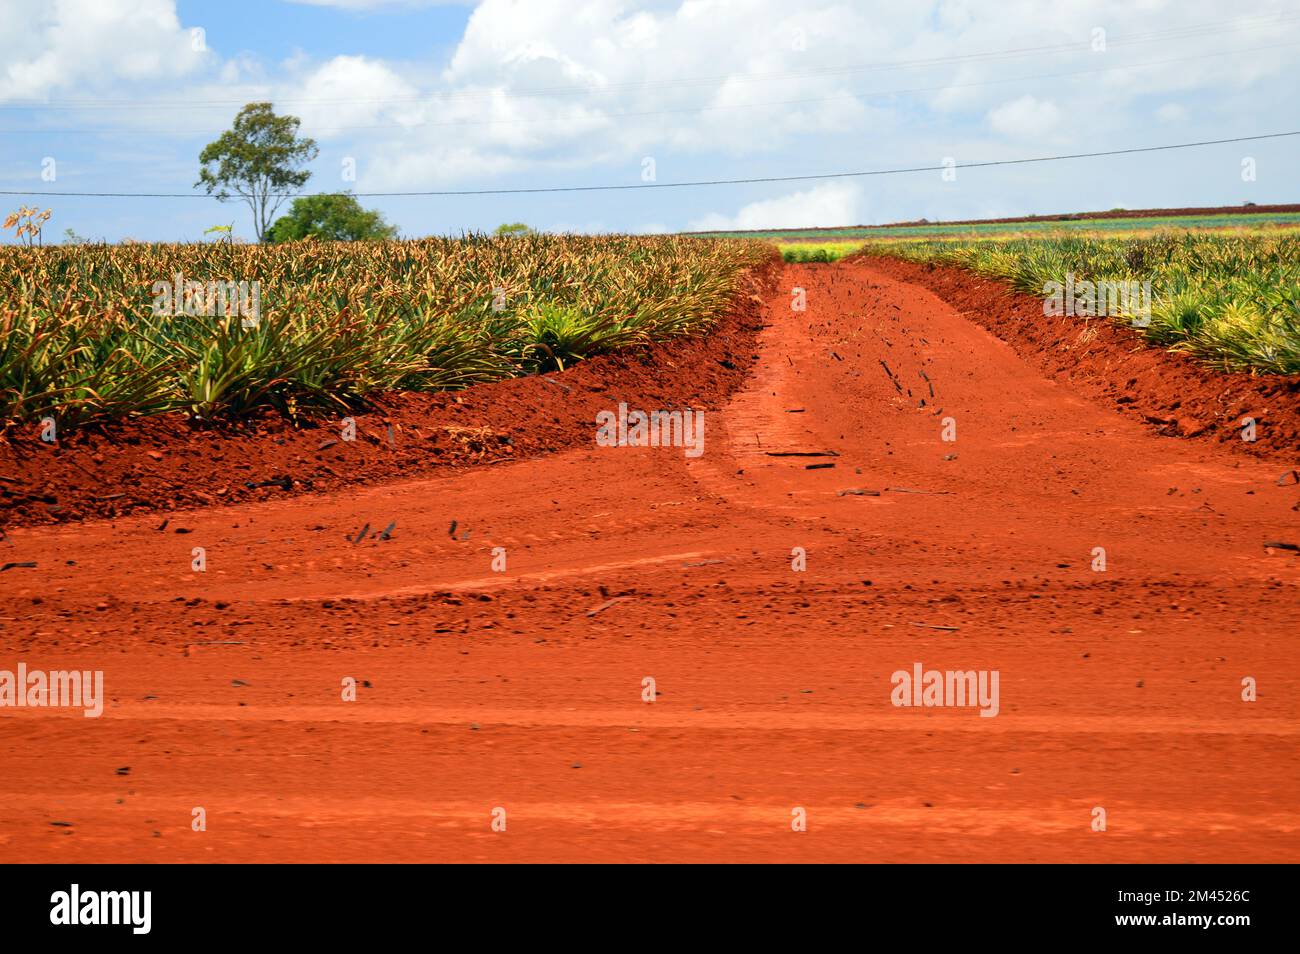 An intersection of dirt roads shows red clay for the oxidized soil at a pineapple plantation in Hawaii Stock Photo